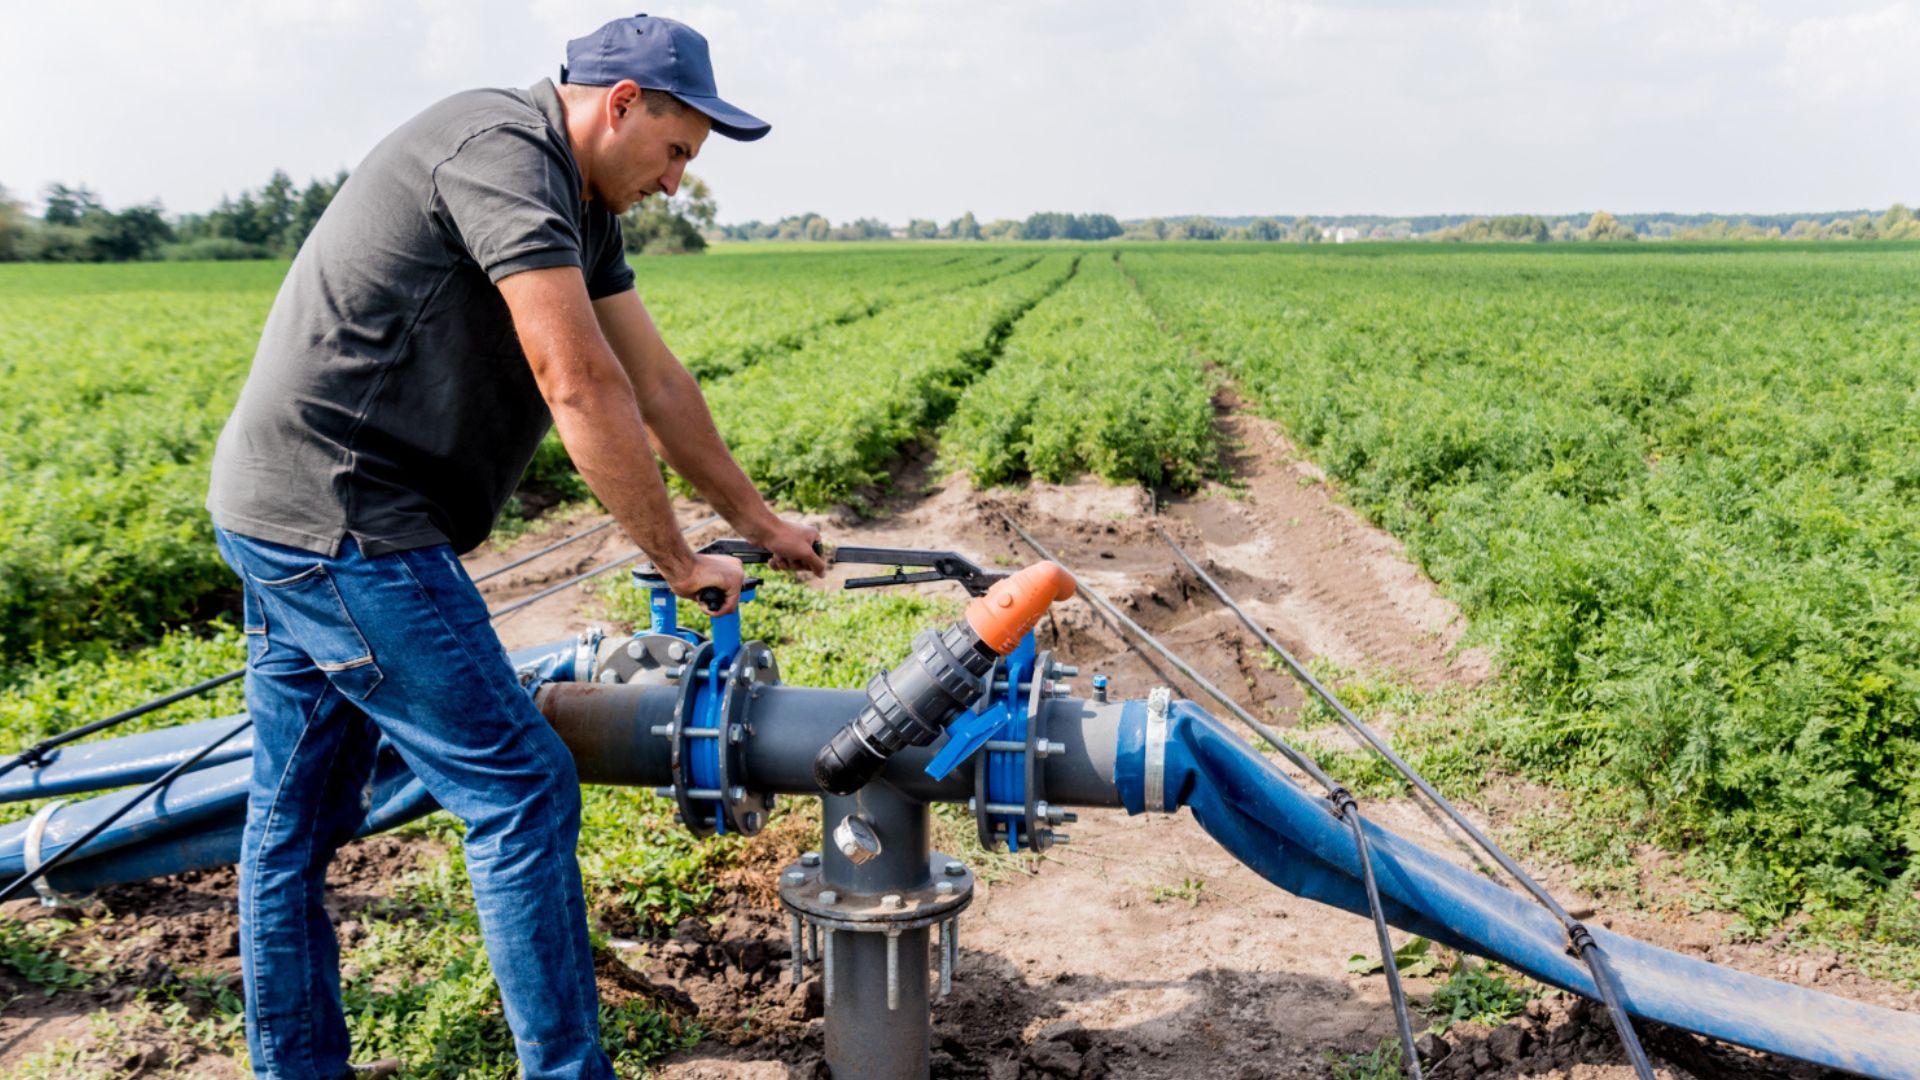 Superior Irrigation Design & Services revolves around more than just delivering exceptional irrigation solutions